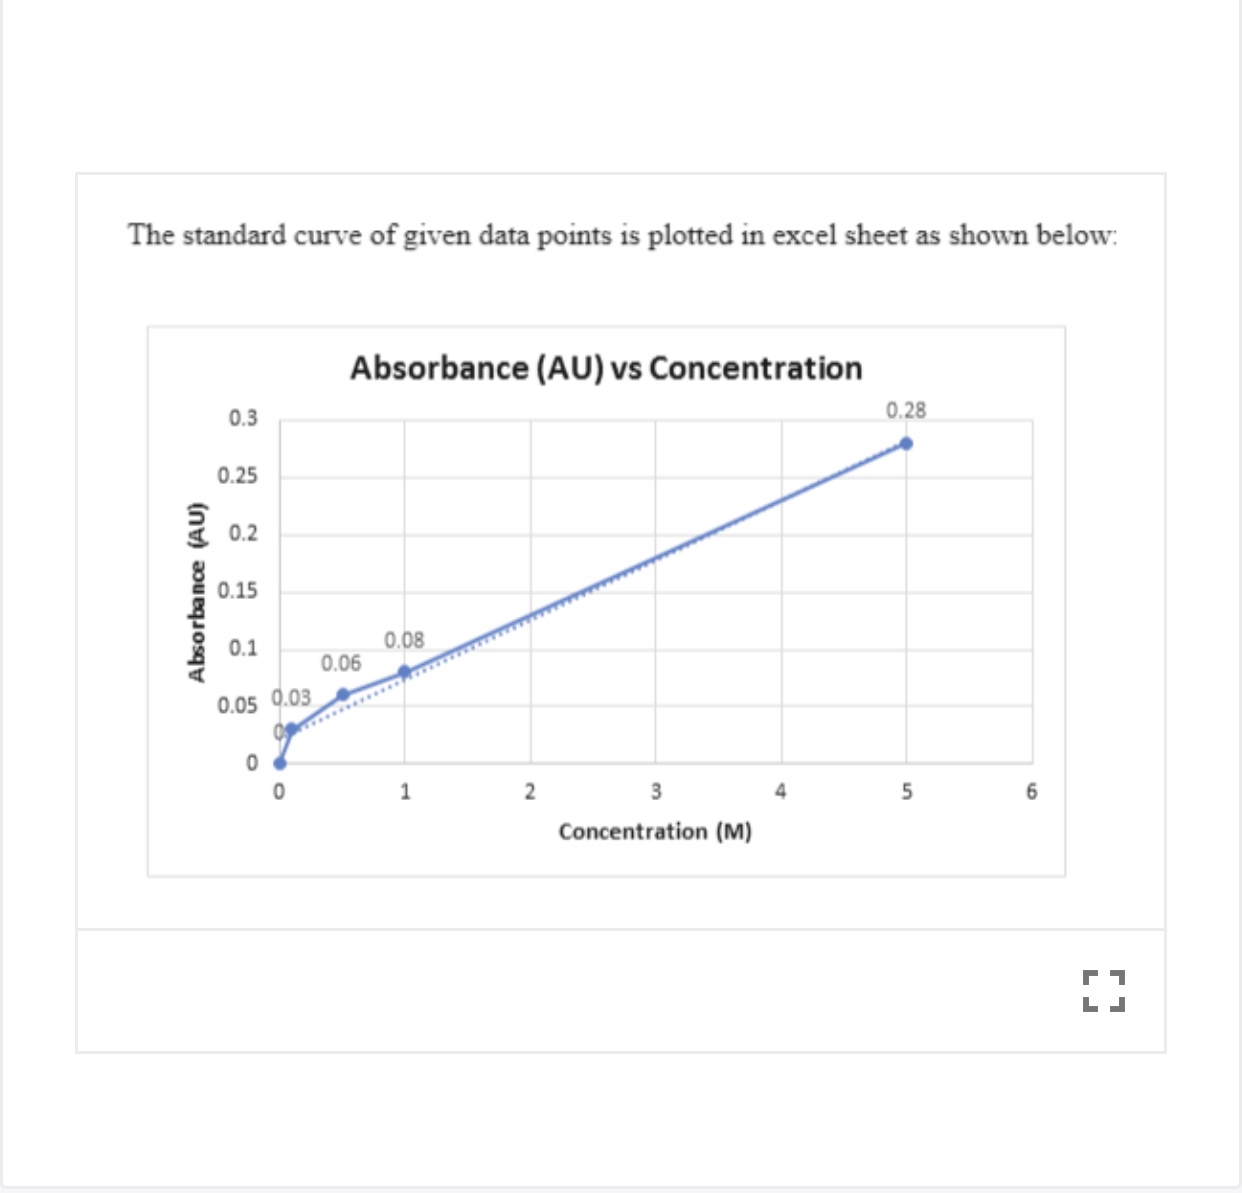 The standard curve of given data points is plotted in excel sheet as shown below:
Absorbance (AU) vs Concentration
0.28
0.3
0.25
2 0.2
0.15
0.08
0.1
0.06
0.05 0.03
3
Concentration (M)
Absorbance (AU)
